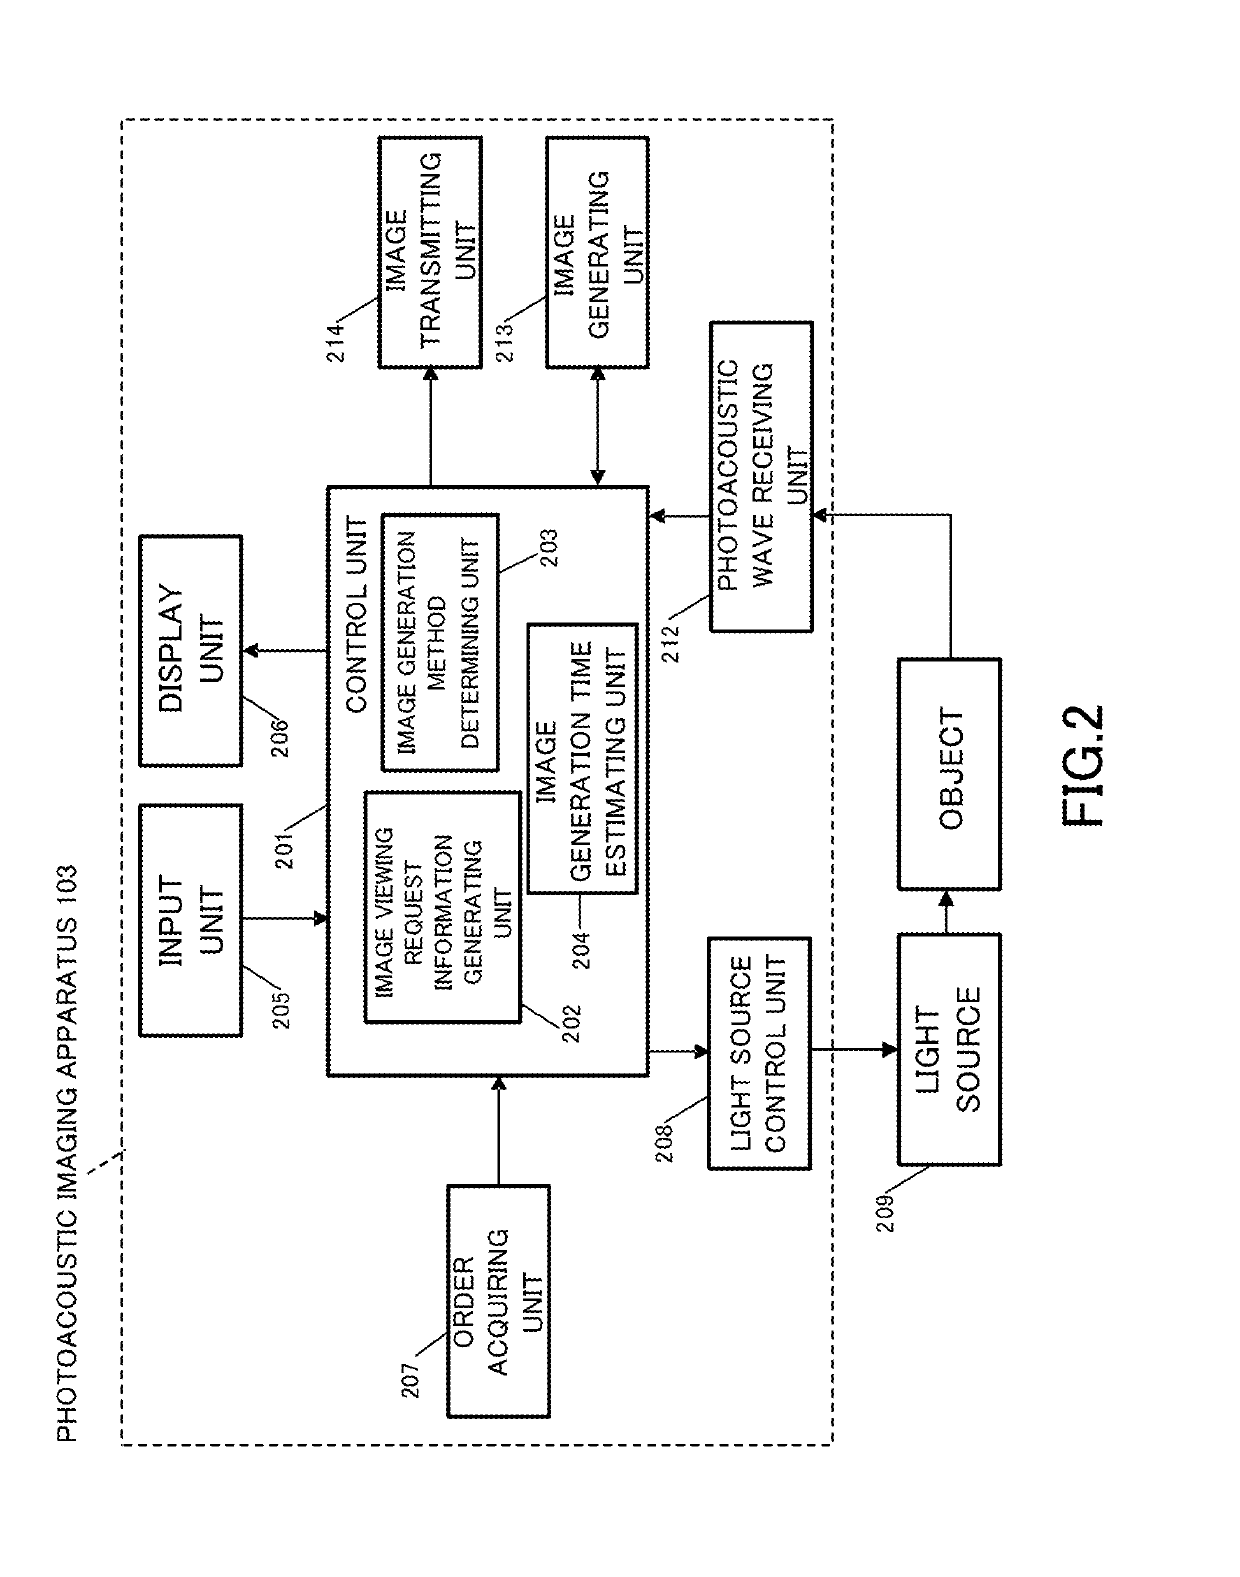 Image generating apparatus and control method therefor